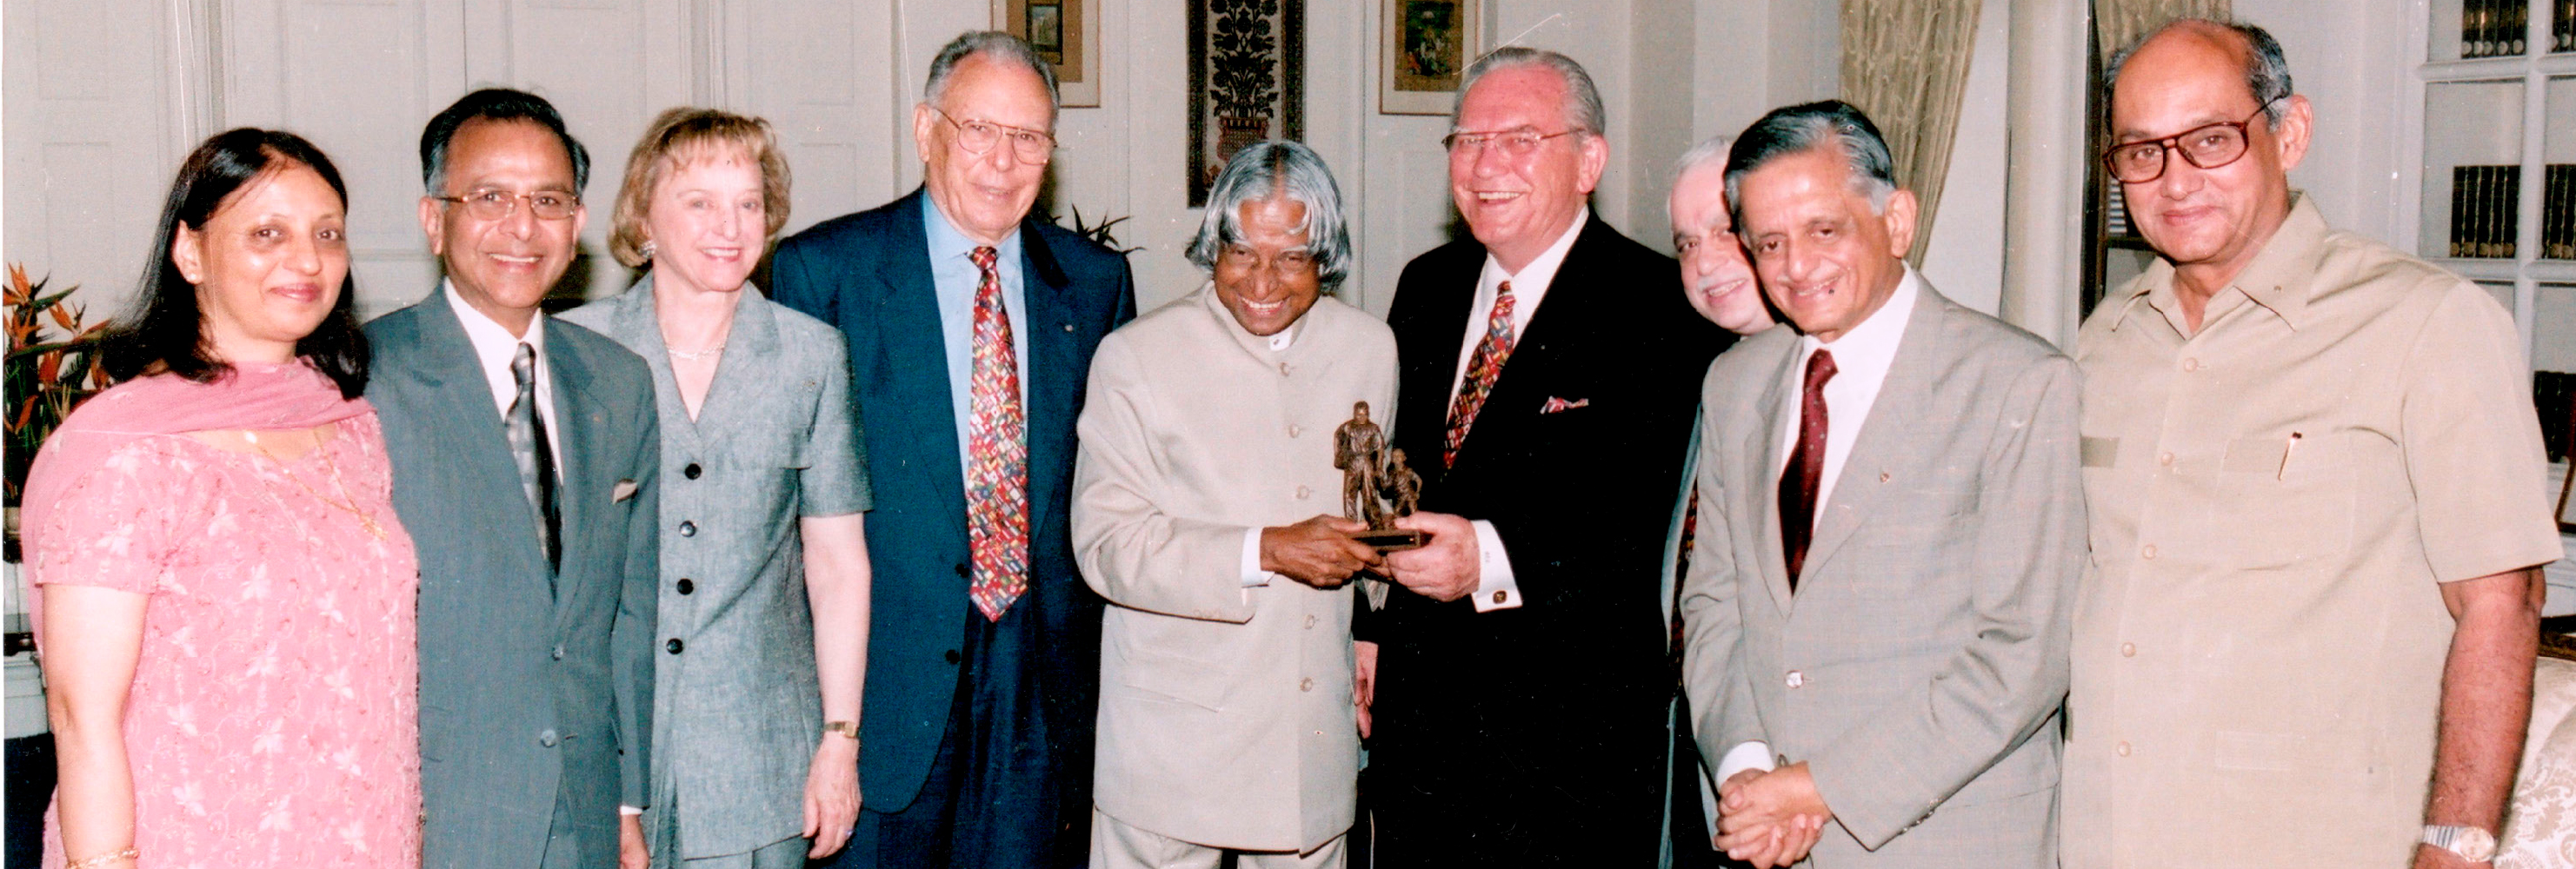 PRIP Ravizza, as TRF chair, along with the then RI President Glenn Estess (fourth from R), at the RI  Presidential Polio Summit held in Delhi in 2004, for which the then President of India Dr A P J Abdul Kalam was the chief guest. Also seen  (from L):  Vinita Gupta, PRIP Saboo, Rossana, PRID Sushil Gupta, PRID Sudarshan Agarwal and PRIP Kalyan Banerjee. 